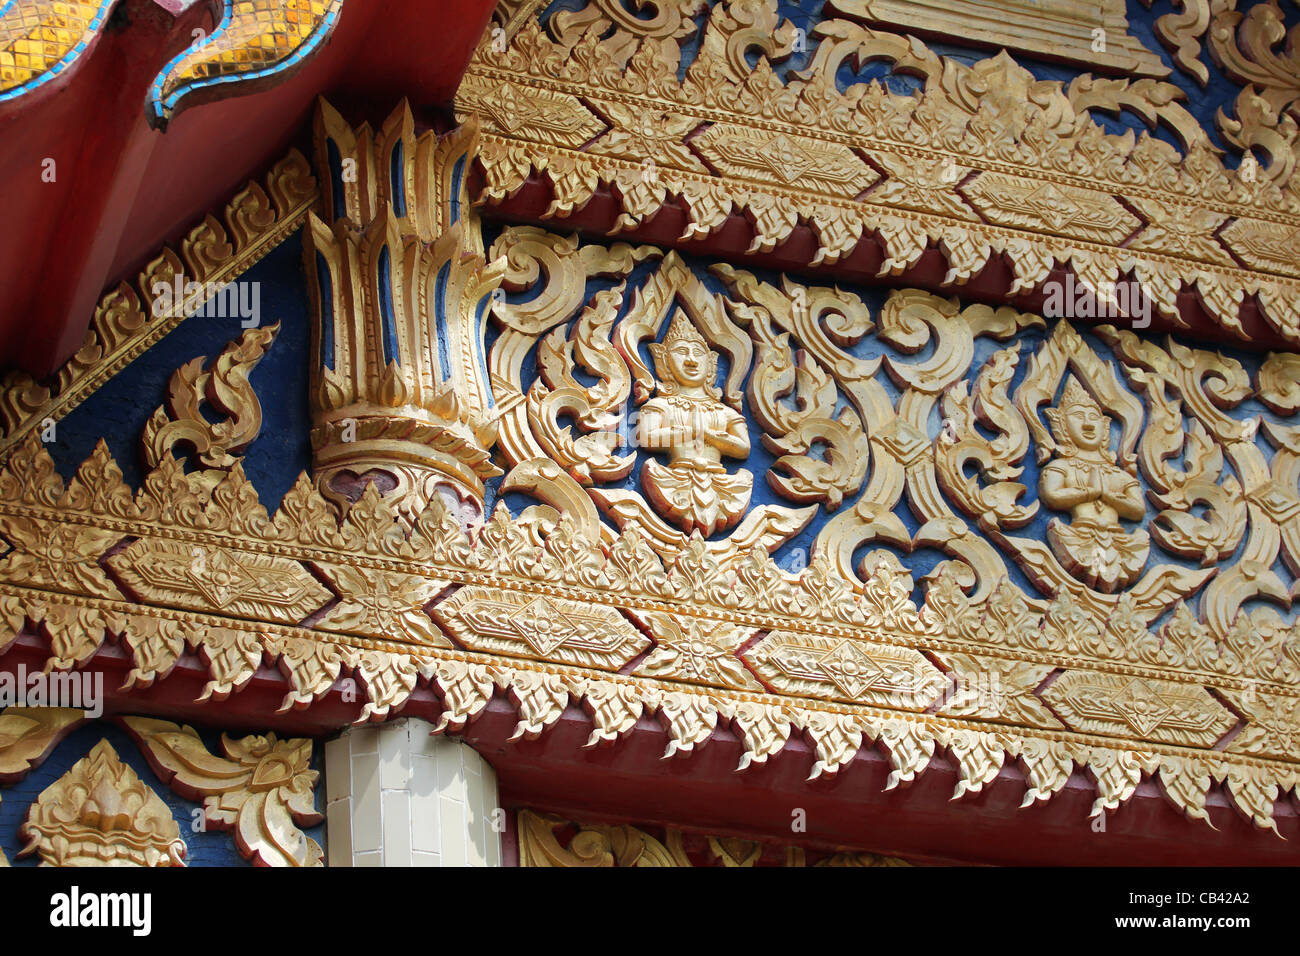 Buddhist temple in Issan, Thailand. Stock Photo